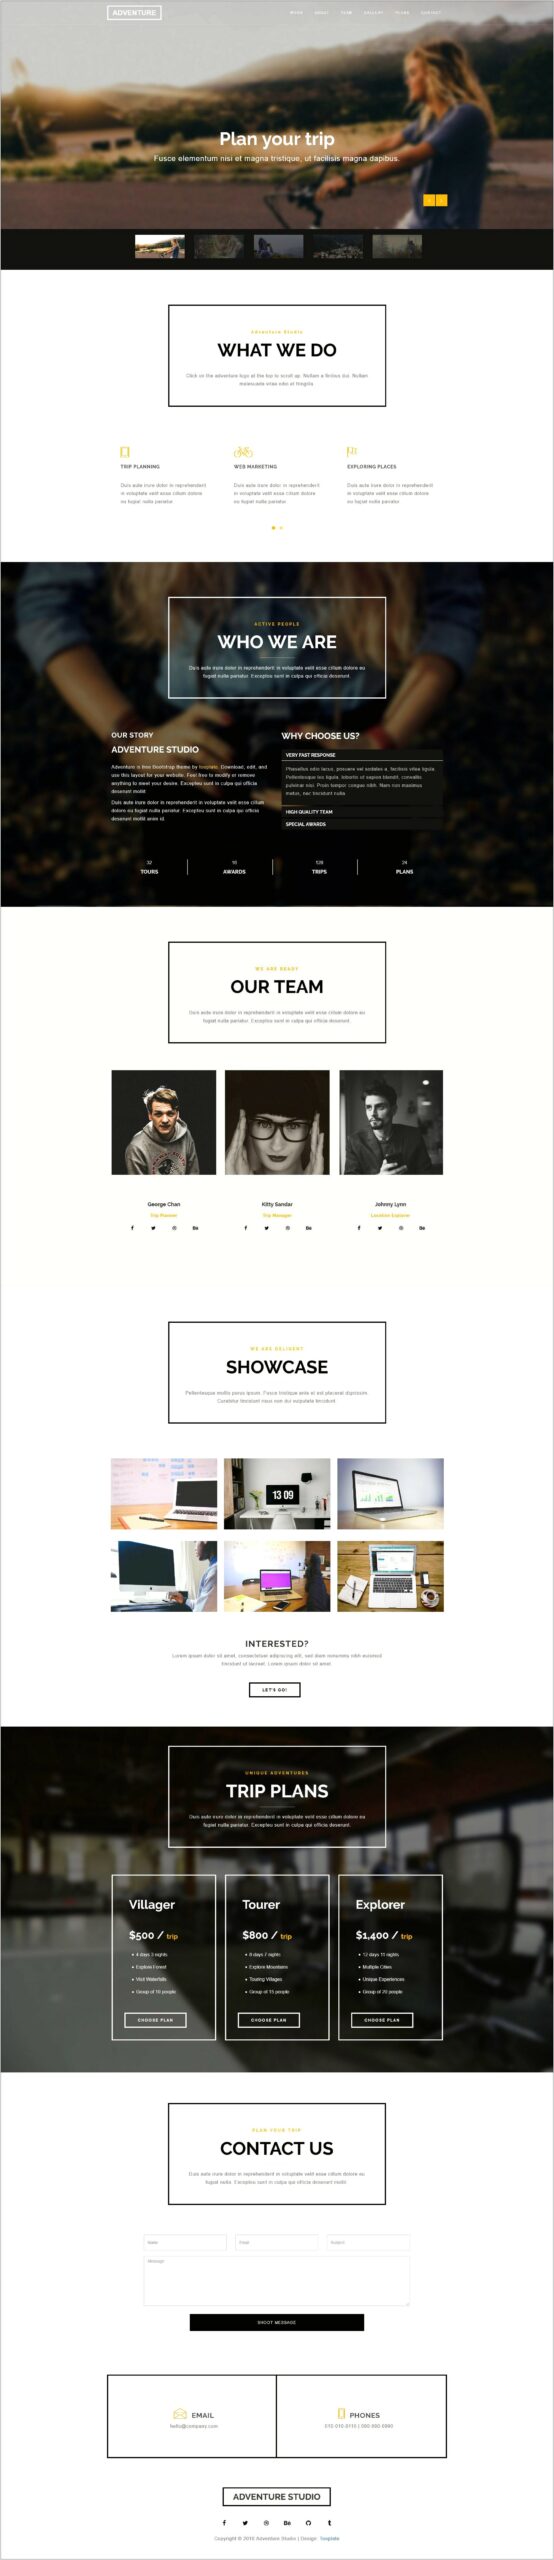 Bootstrap Responsive Template With Slider Free Download